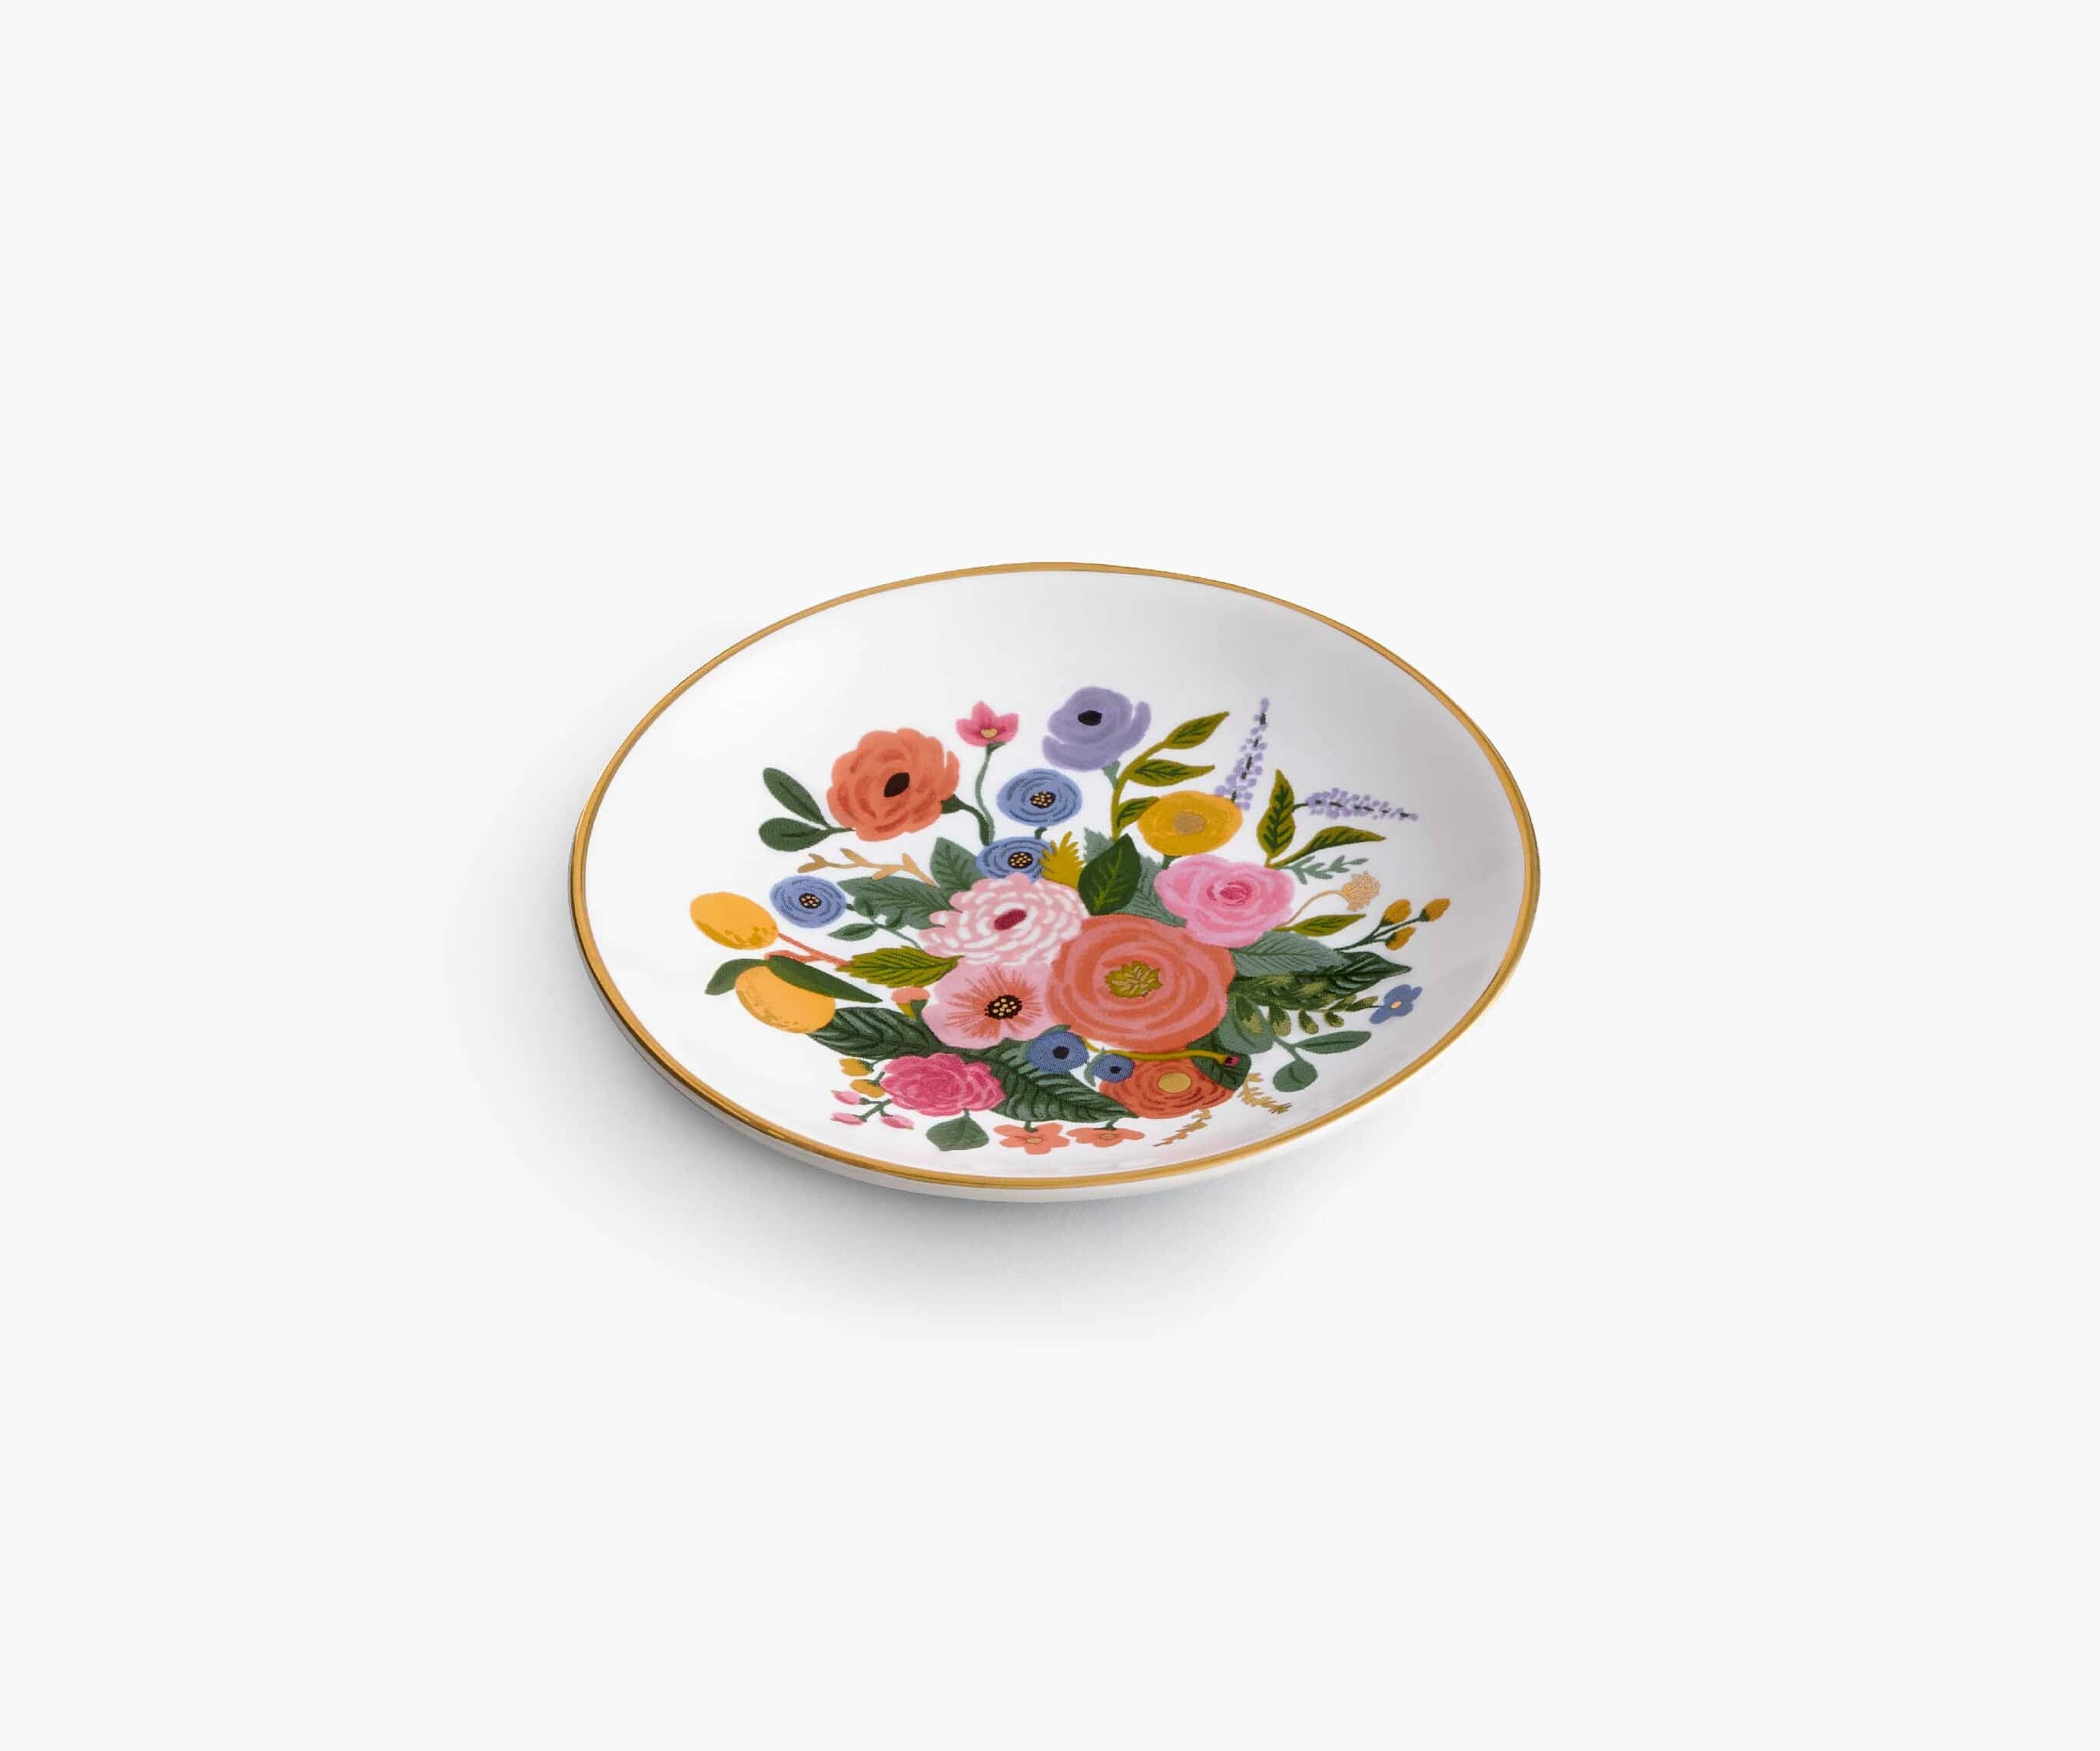  RIFLE PAPER CO. Blossom Ring Dish, Protect Your Trinkets and  Jewelry, Minimize Loss, Organize Desk, Small Item Security, Keep Valuables  Safe and Visible, Cute and Fashionable : Home & Kitchen